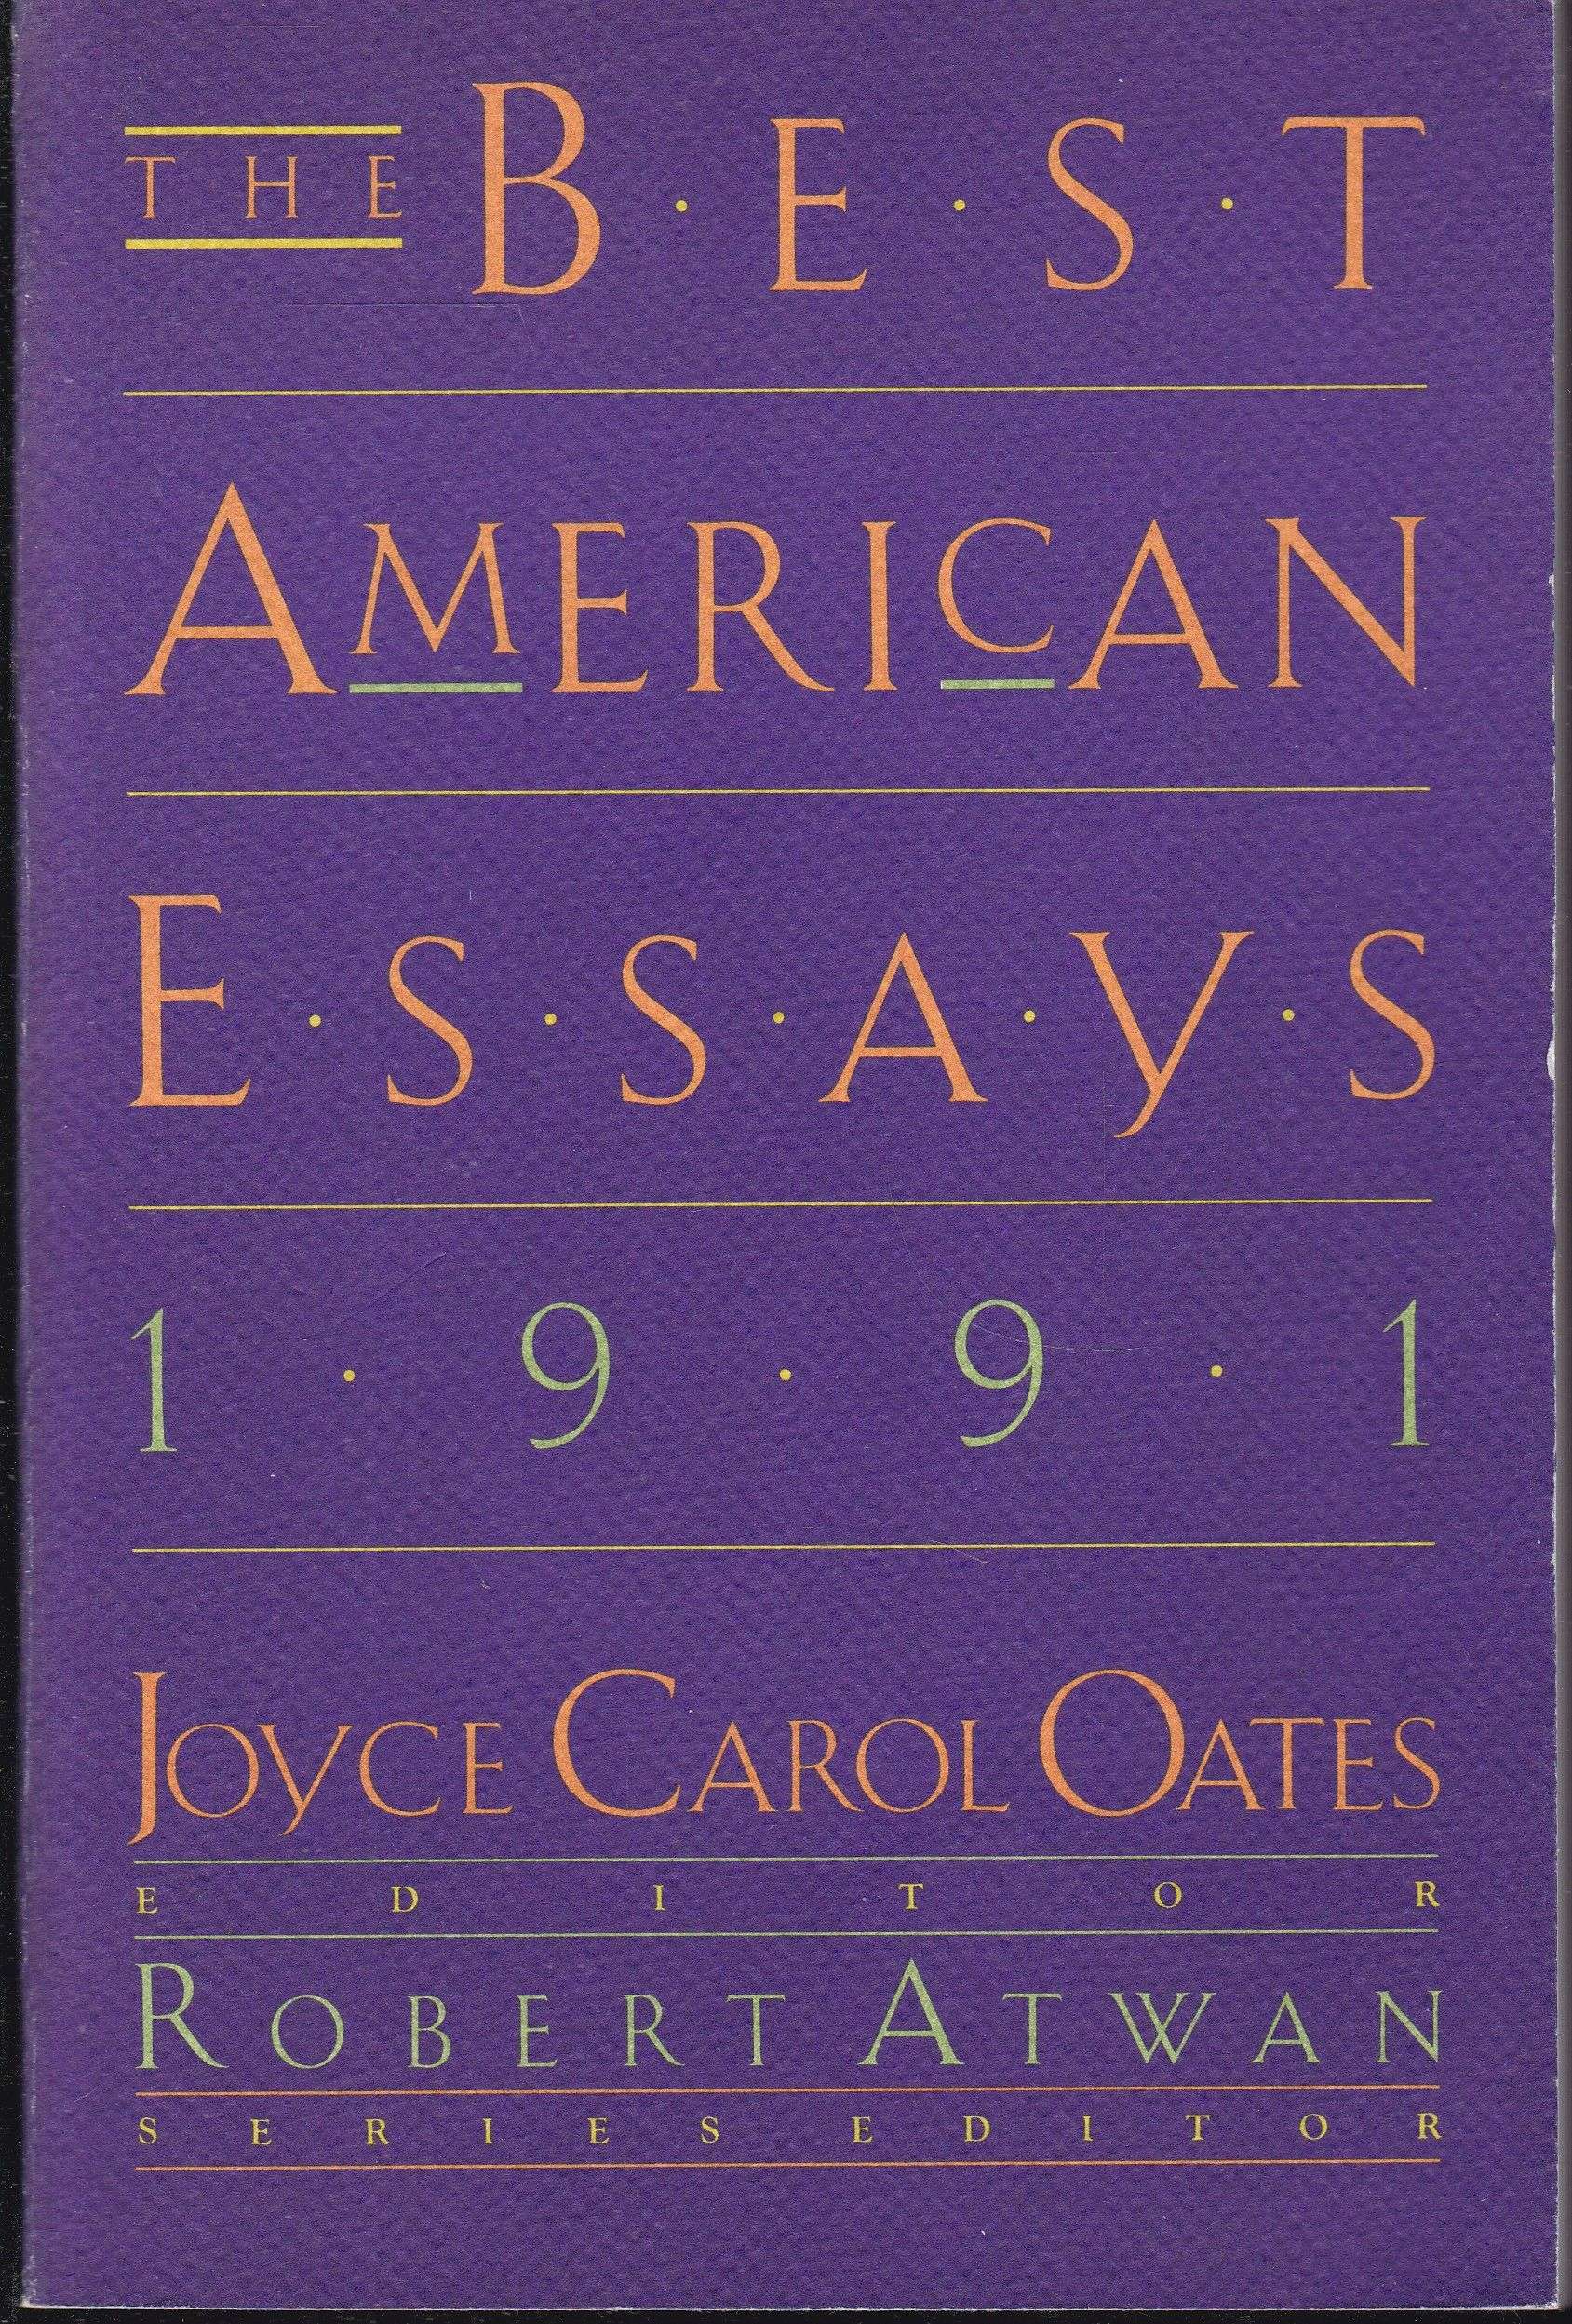 The Best American Essays, 1991